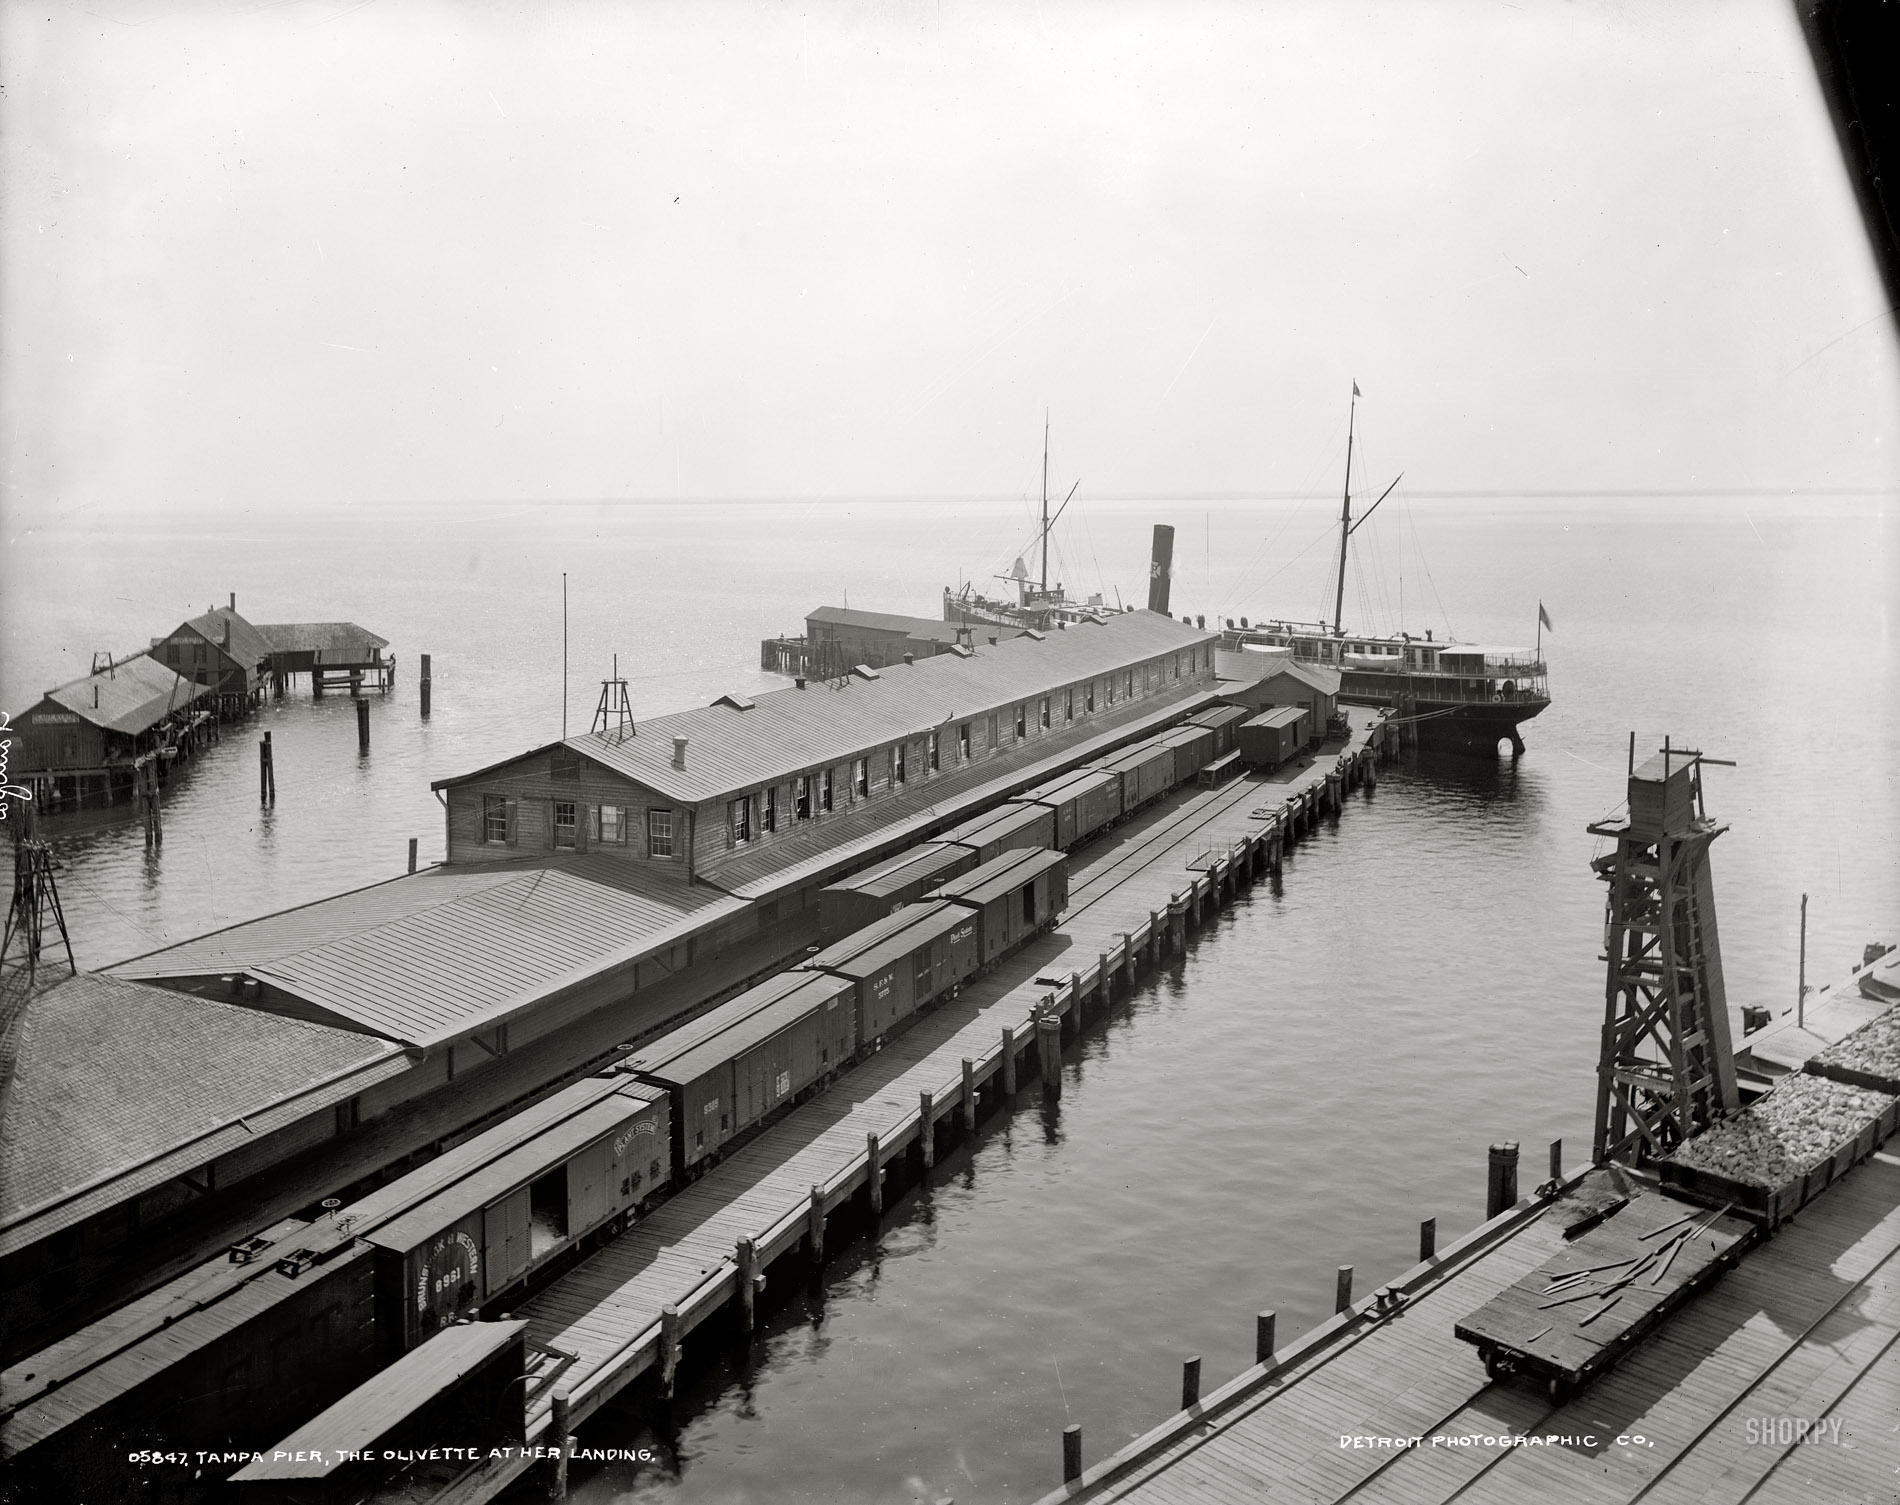 Tampa, Florida, circa 1900. "Tampa pier. The Olivette at her landing." Next stop: Margaritaville. Detroit Publishing Company glass negative. View full size.